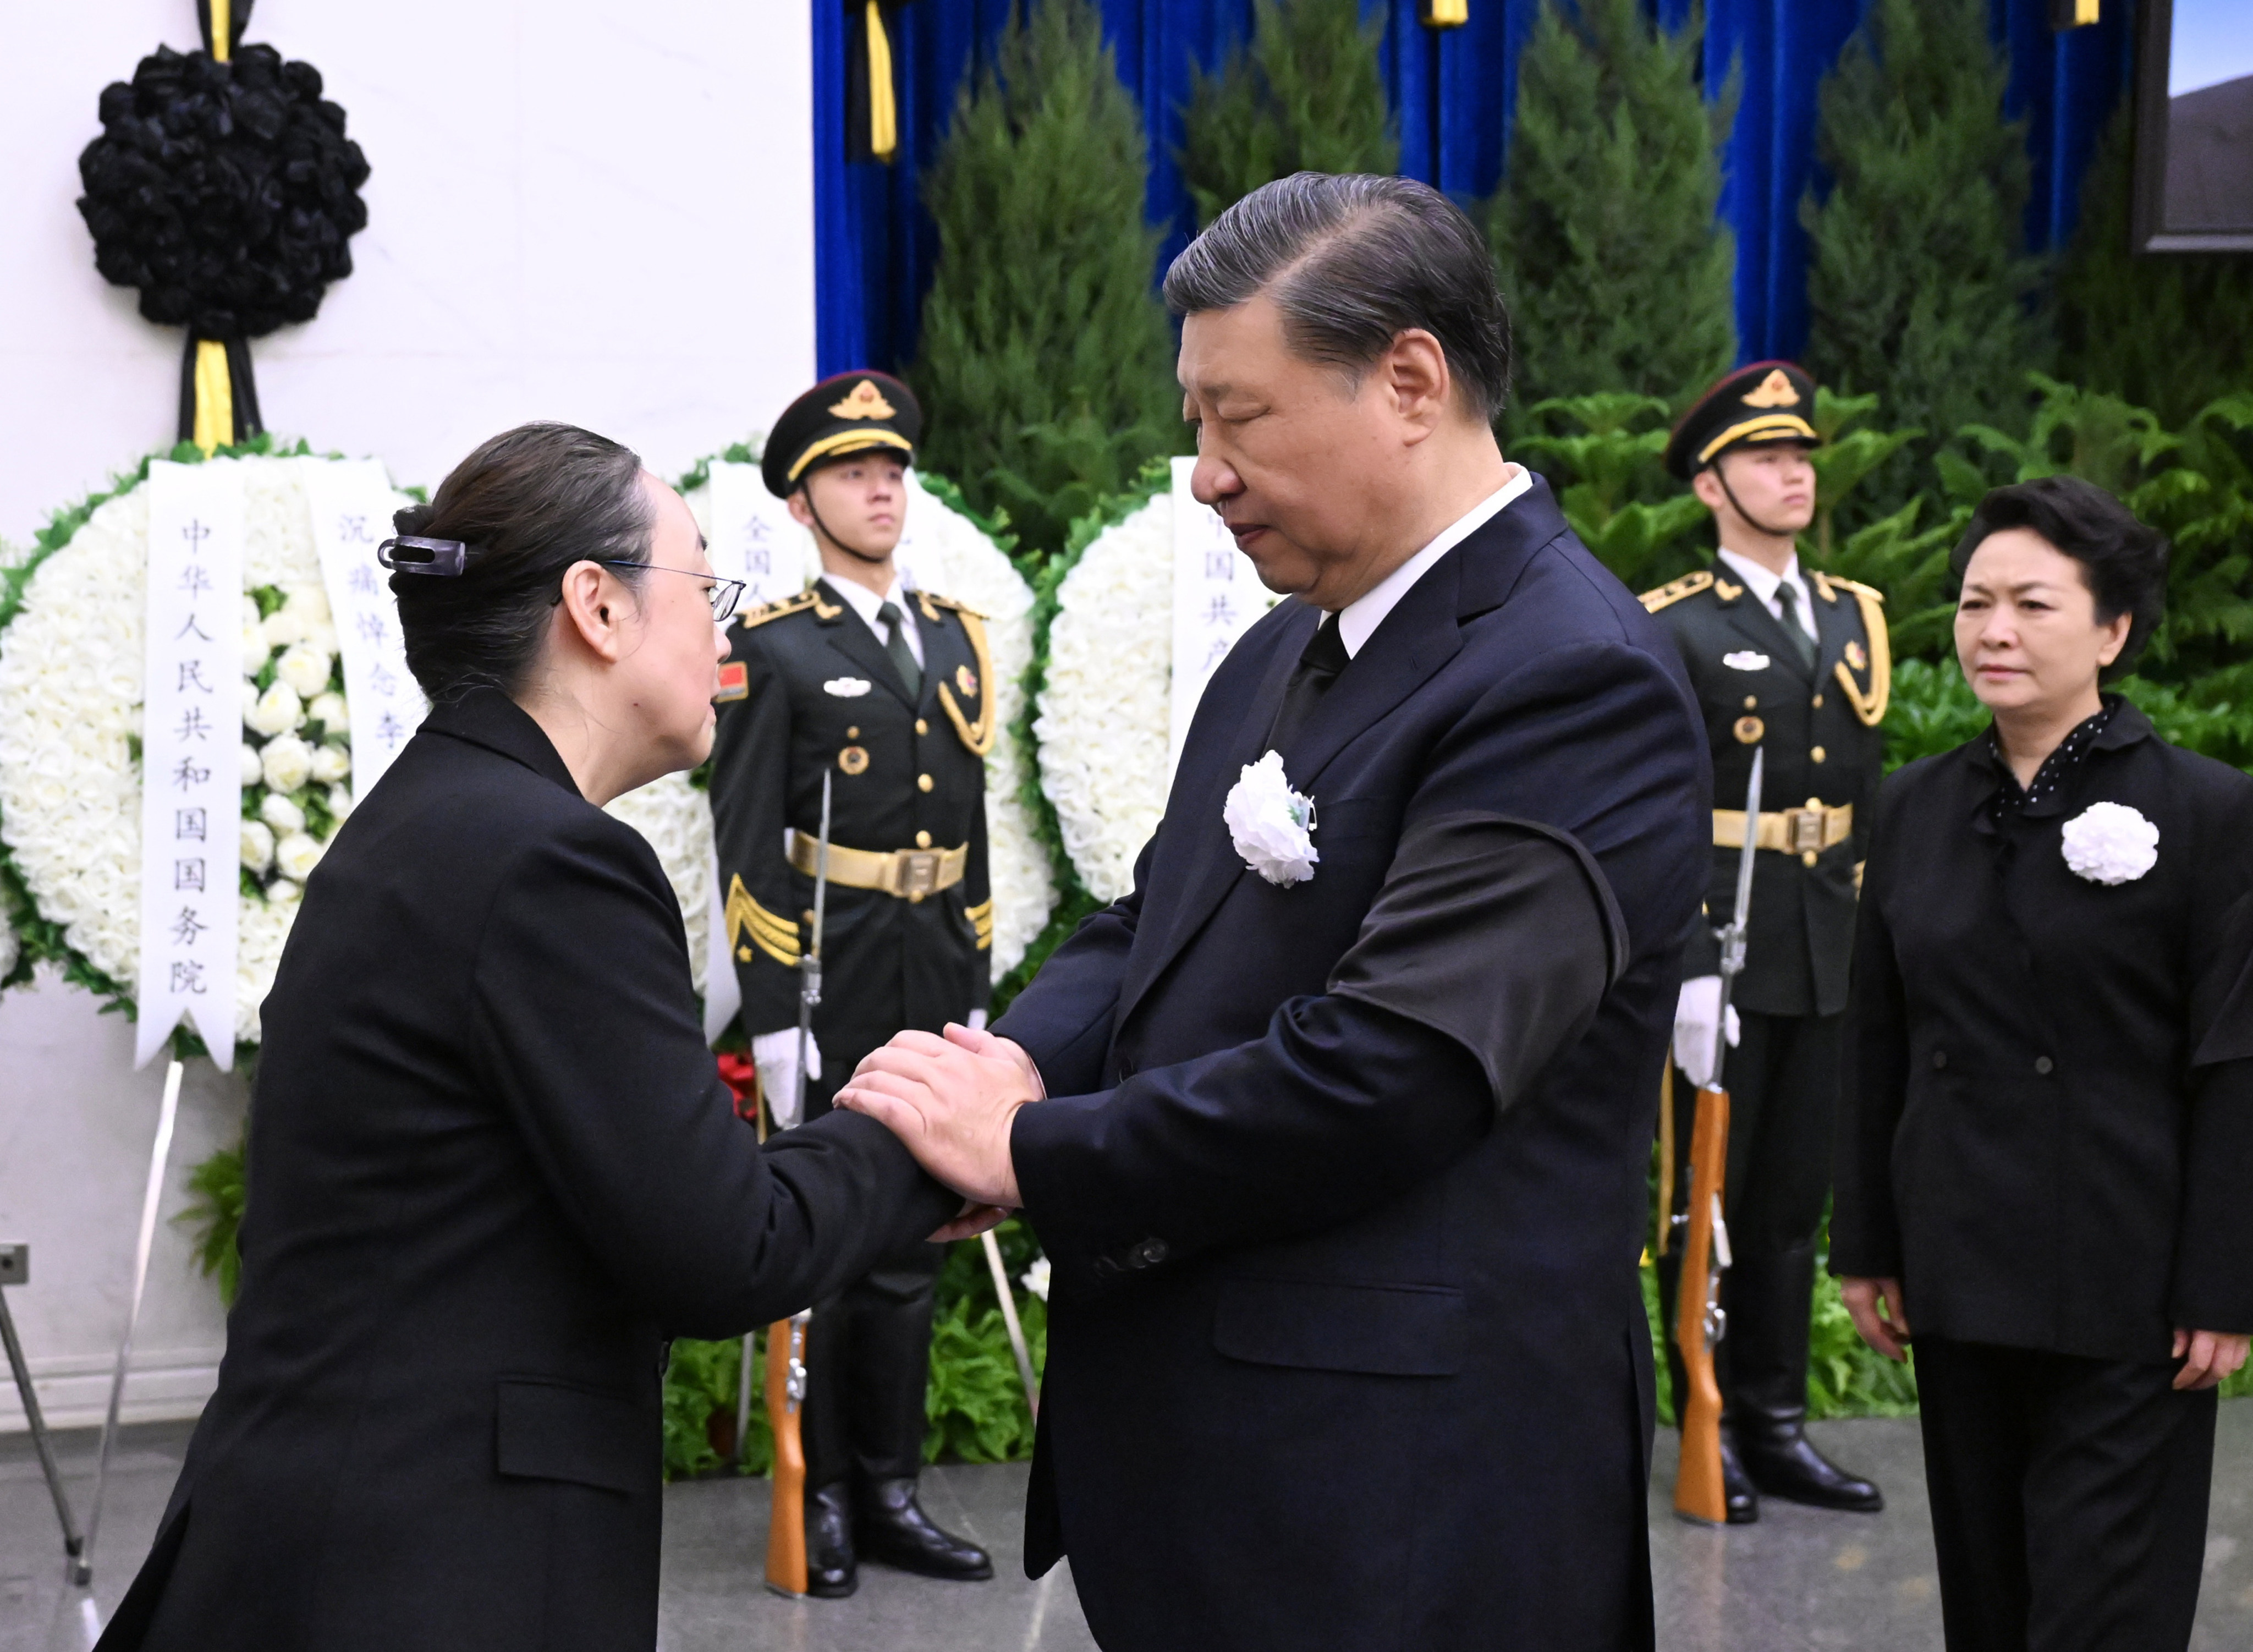 Chinese President Xi Jinping offers his condolences to Cheng Hong, the wife of late premier Li Keqiang, with Xi’s wife Peng Liyuan behind him on Thursday. Photo: Xinhua